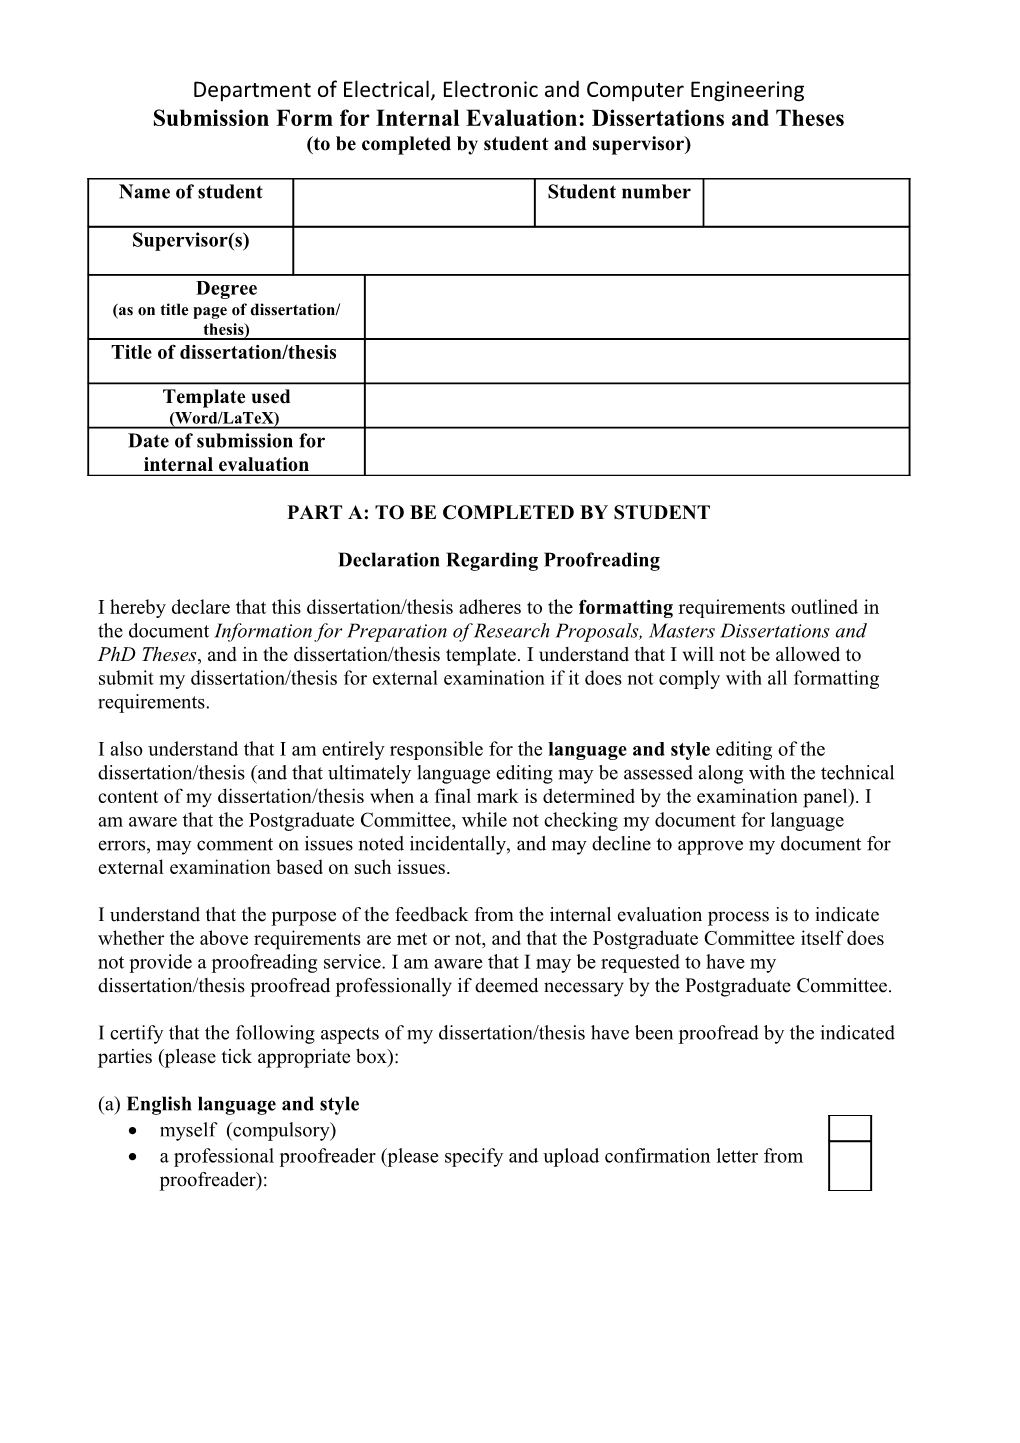 Submission Form for Internal Evaluation: Dissertations and Theses